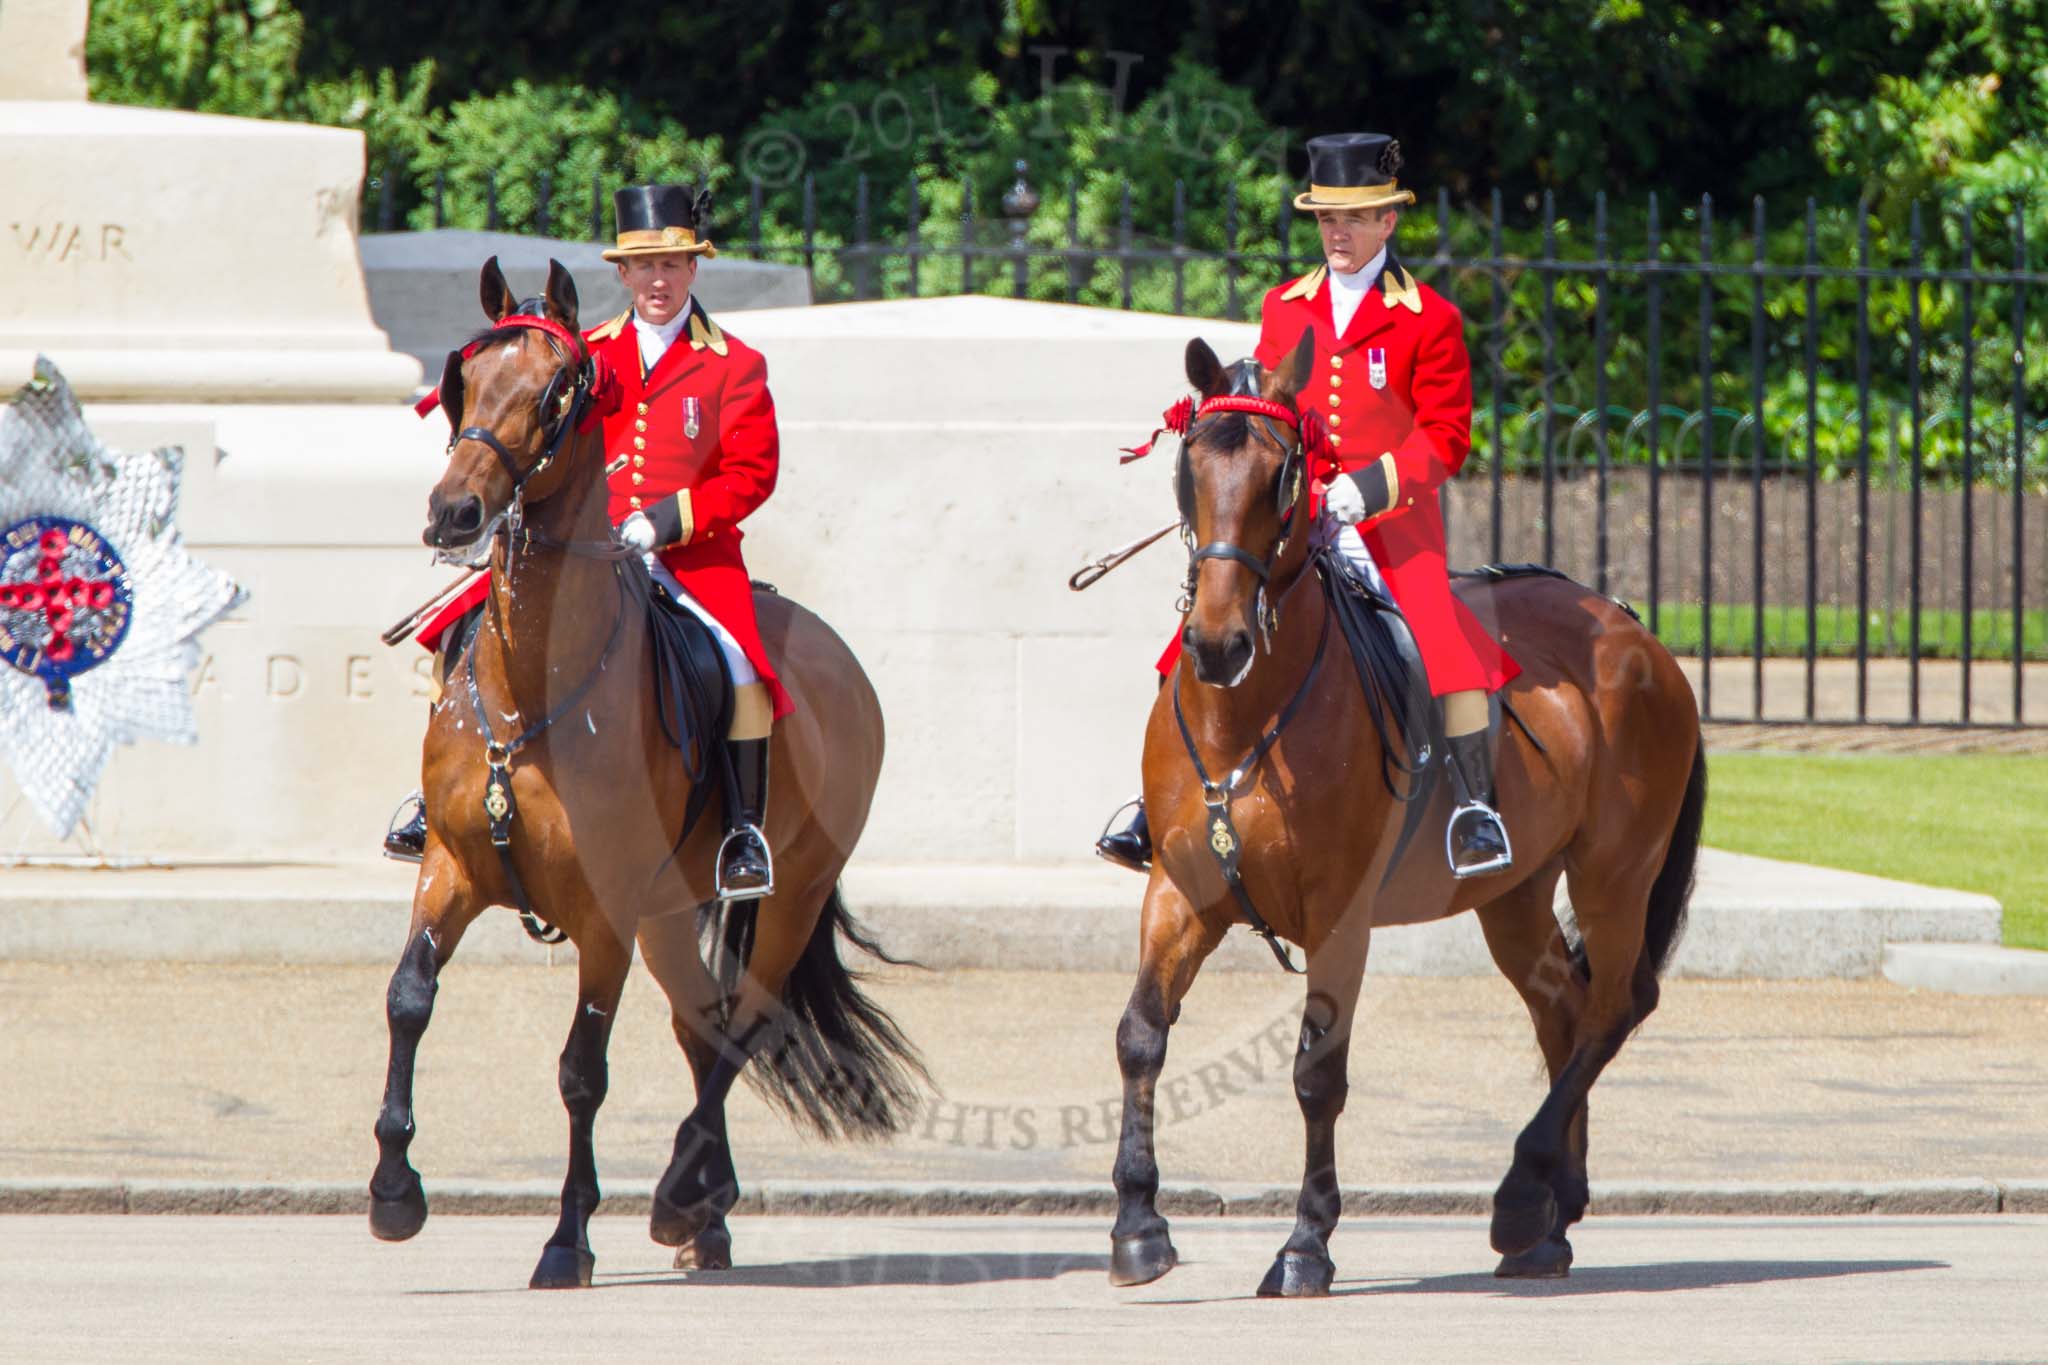 The Colonel's Review 2013: Two grooms leading the group of carriages with members of the Royal Family from Buckingham Palace to Horse Guards Building..
Horse Guards Parade, Westminster,
London SW1,

United Kingdom,
on 08 June 2013 at 10:50, image #219